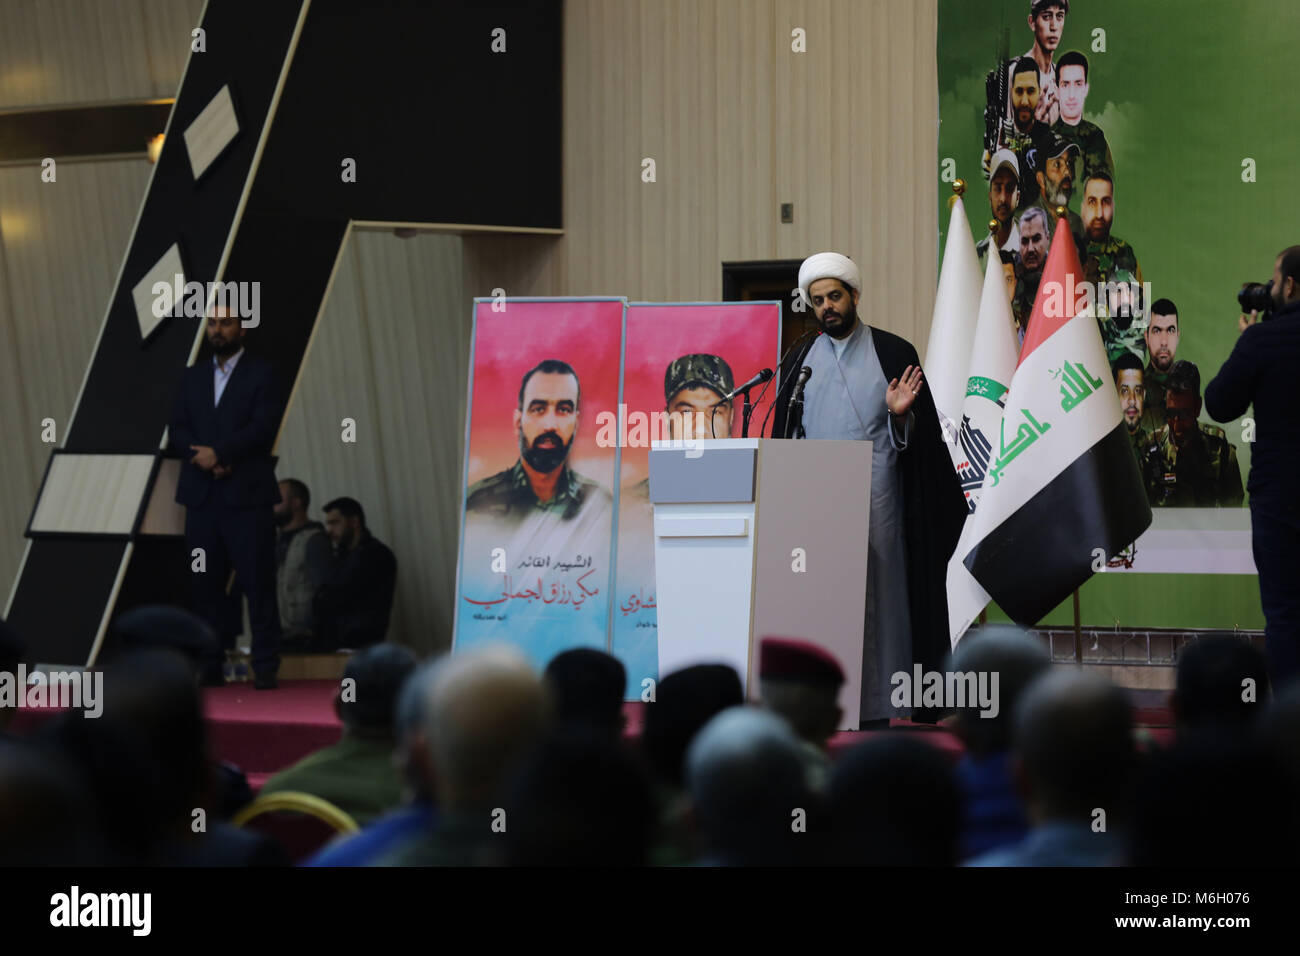 March 3, 2018 - A conference is held in Baghdad to commemorate three years since the recapture of Tikrit from the Islamic State. The conference was attended by the Iraqi Interior Minister, by the commander of the Popular Mobilisation Forces (PMF), Abu Mahdi al-Muhandis, and by the leader of the Credit: ZUMA Press, Inc./Alamy Live News Stock Photo